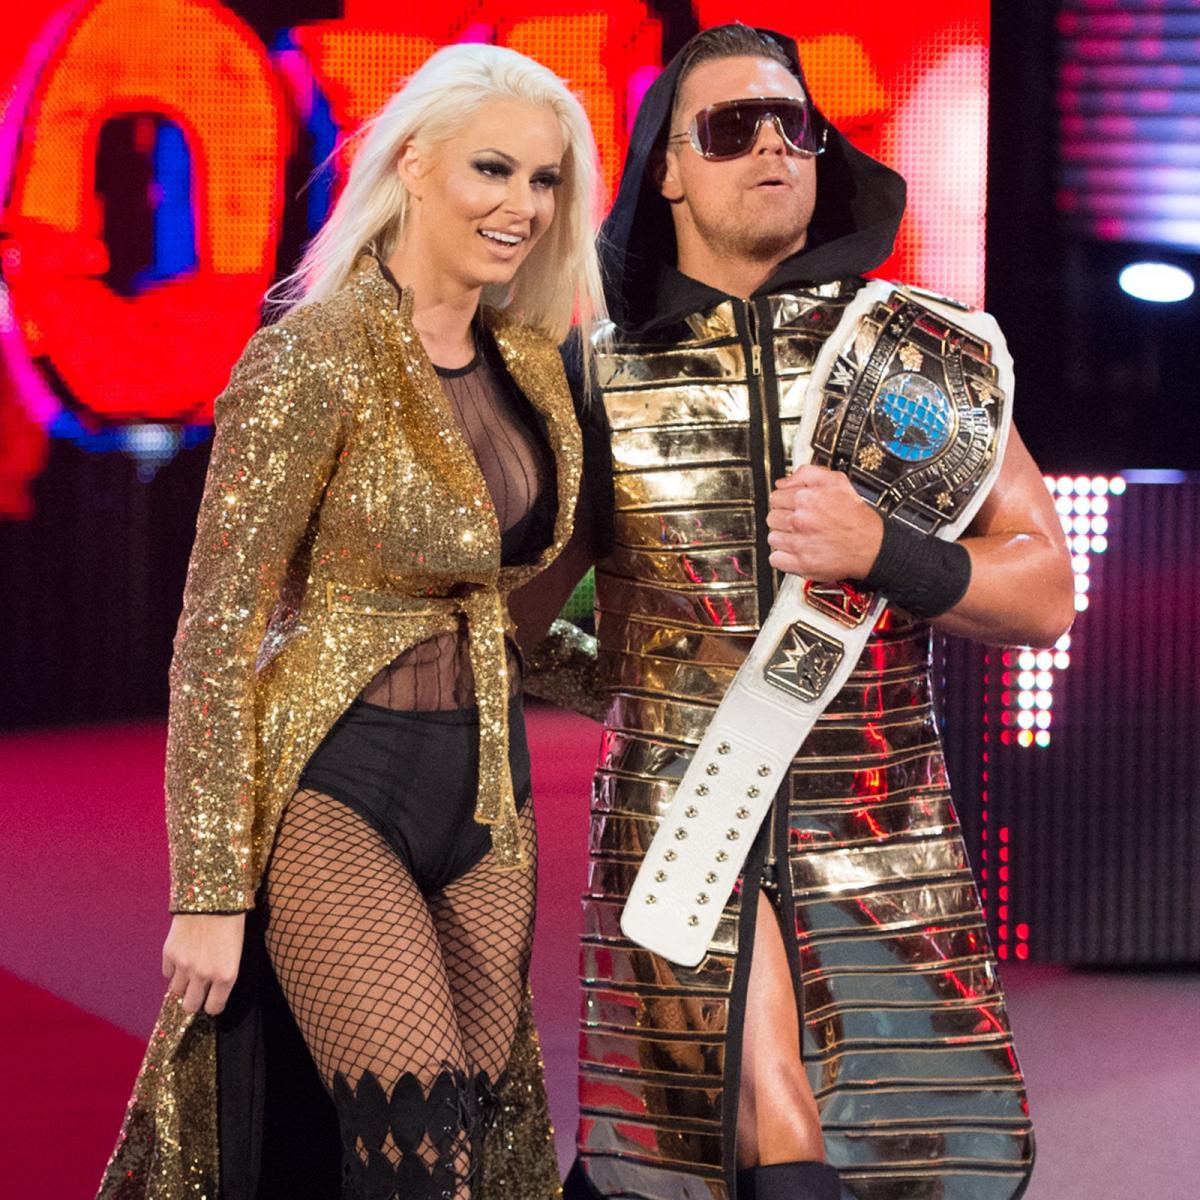 Maryse confirms location of second date with Miz after sex shop outing image